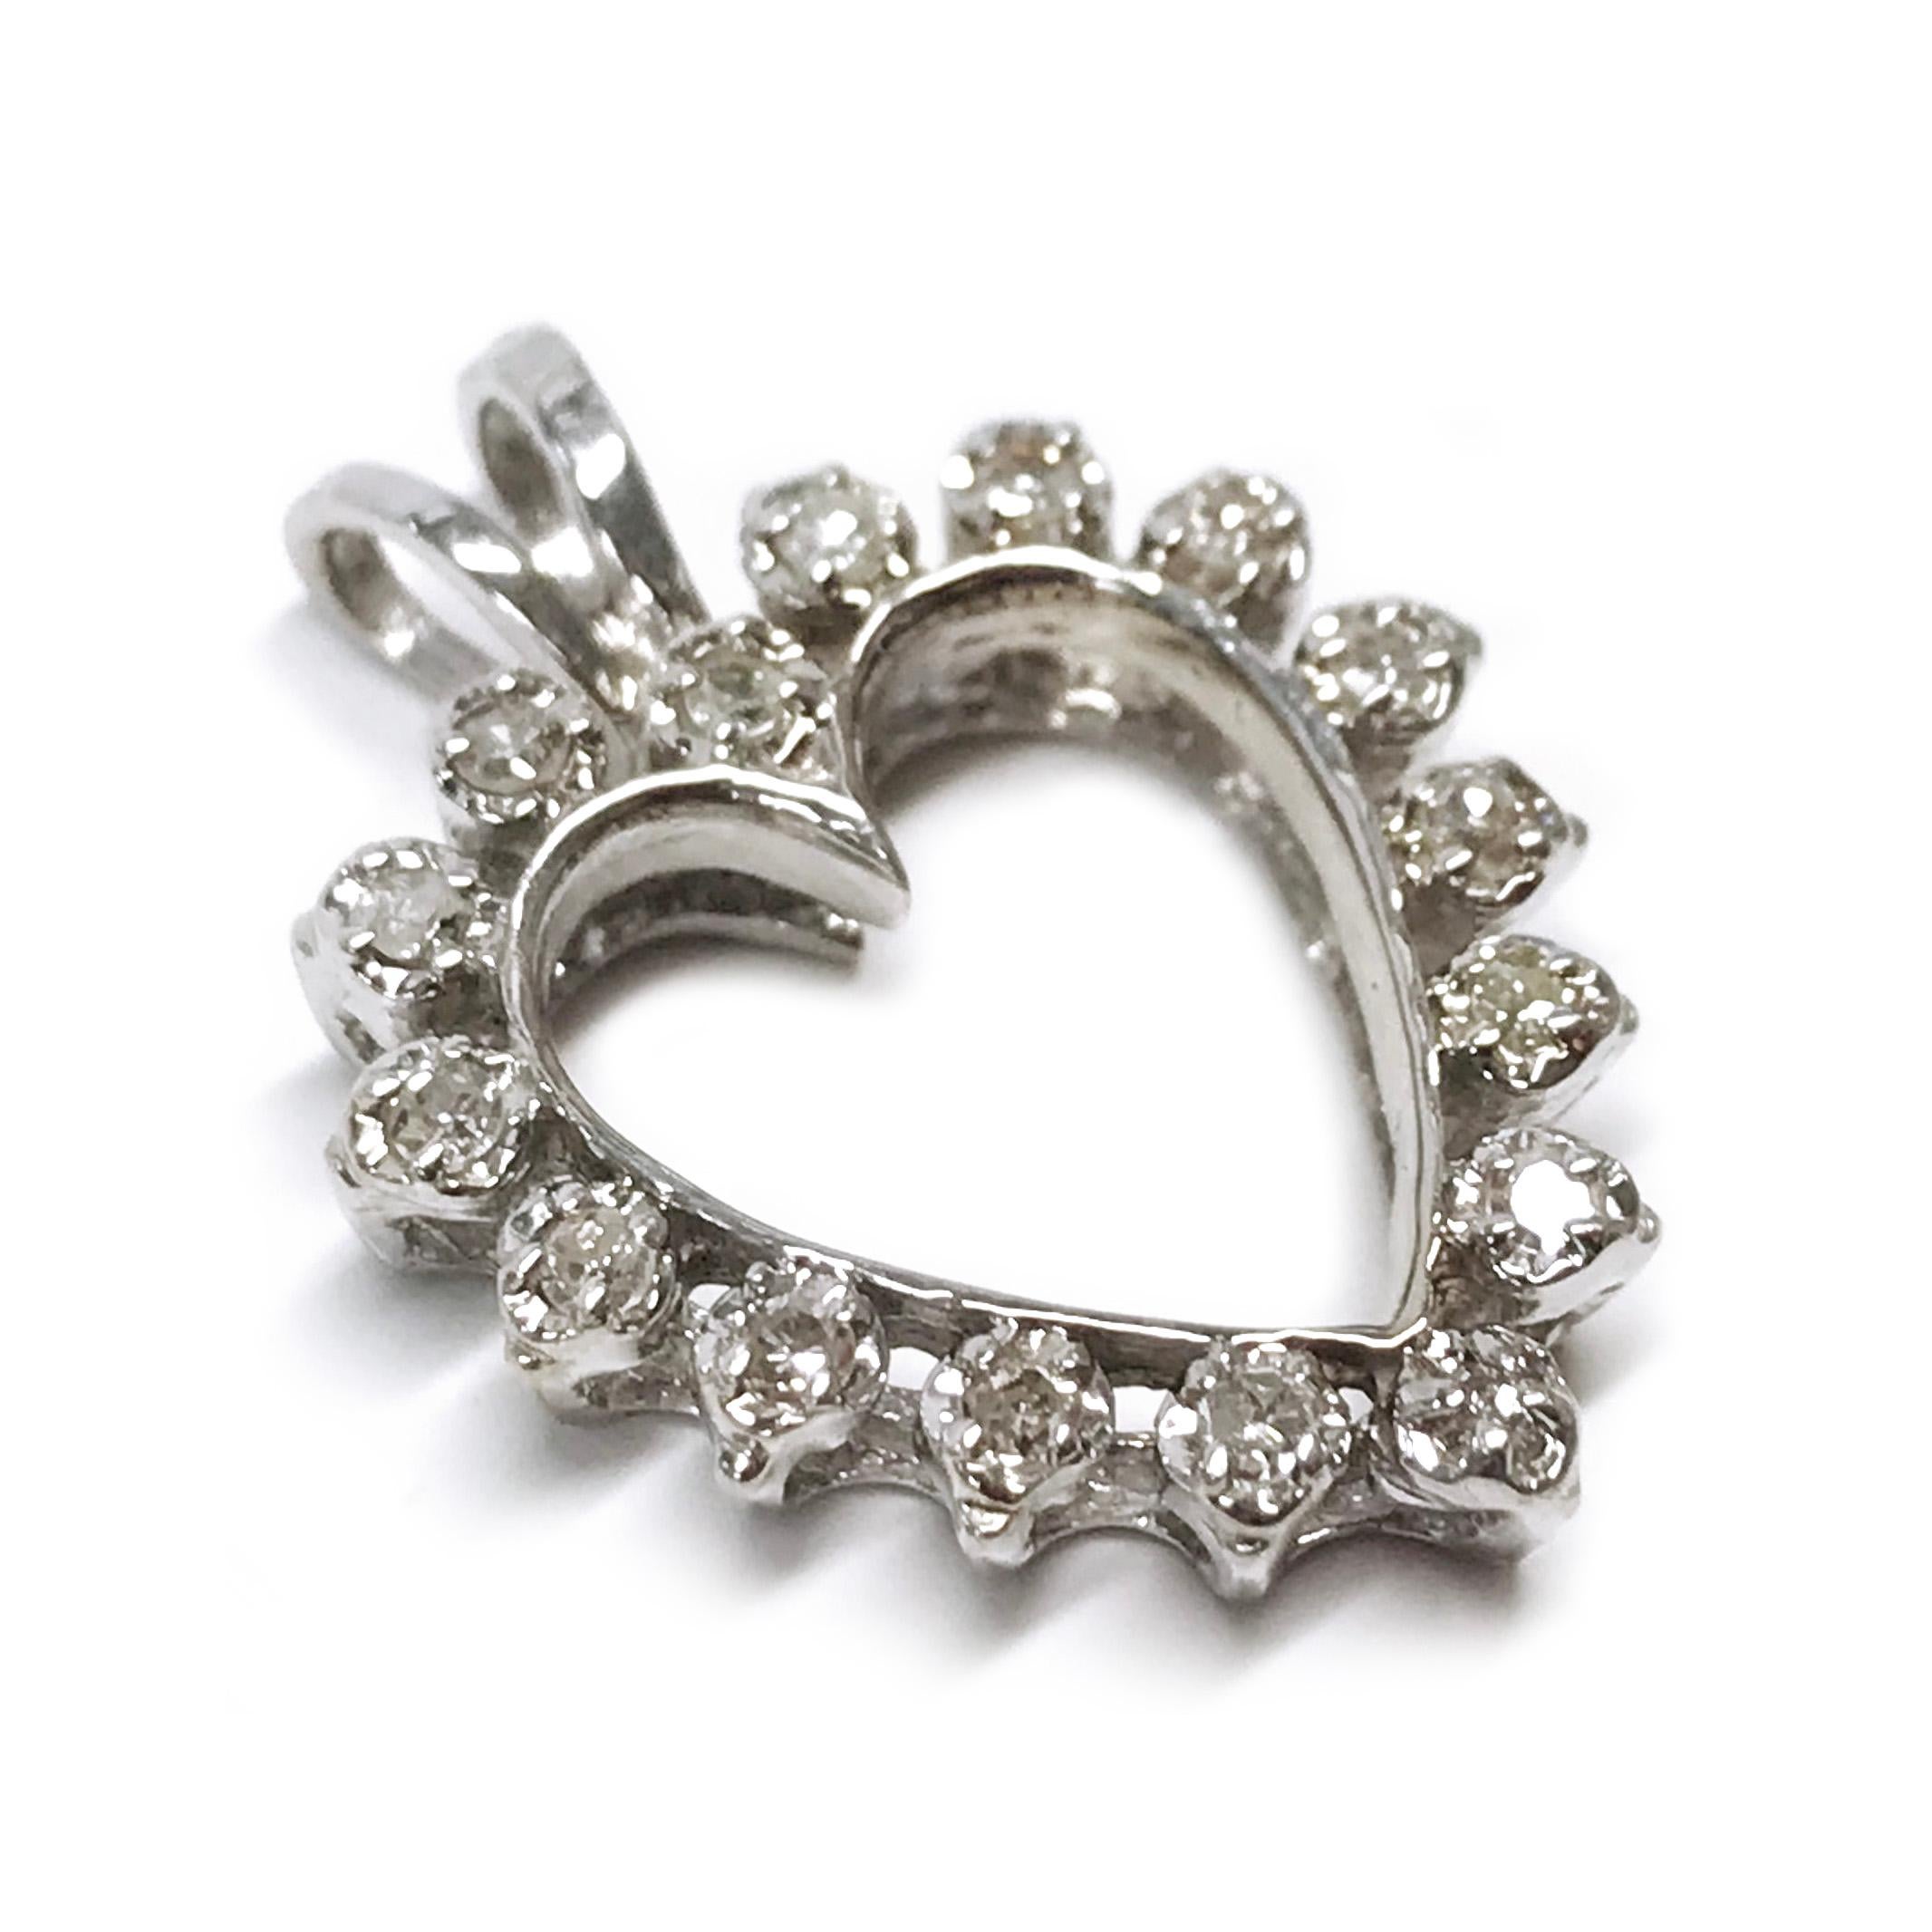 14 Karat White Gold Diamond Heart Pendant. The lovely heart-shaped pendant features sixteen round Illusion-set melee diamonds and the pendant has a rabbit bail. The pendant measures 23.5mm x 17mm. The total weight of the diamonds is 0.16ctw. The